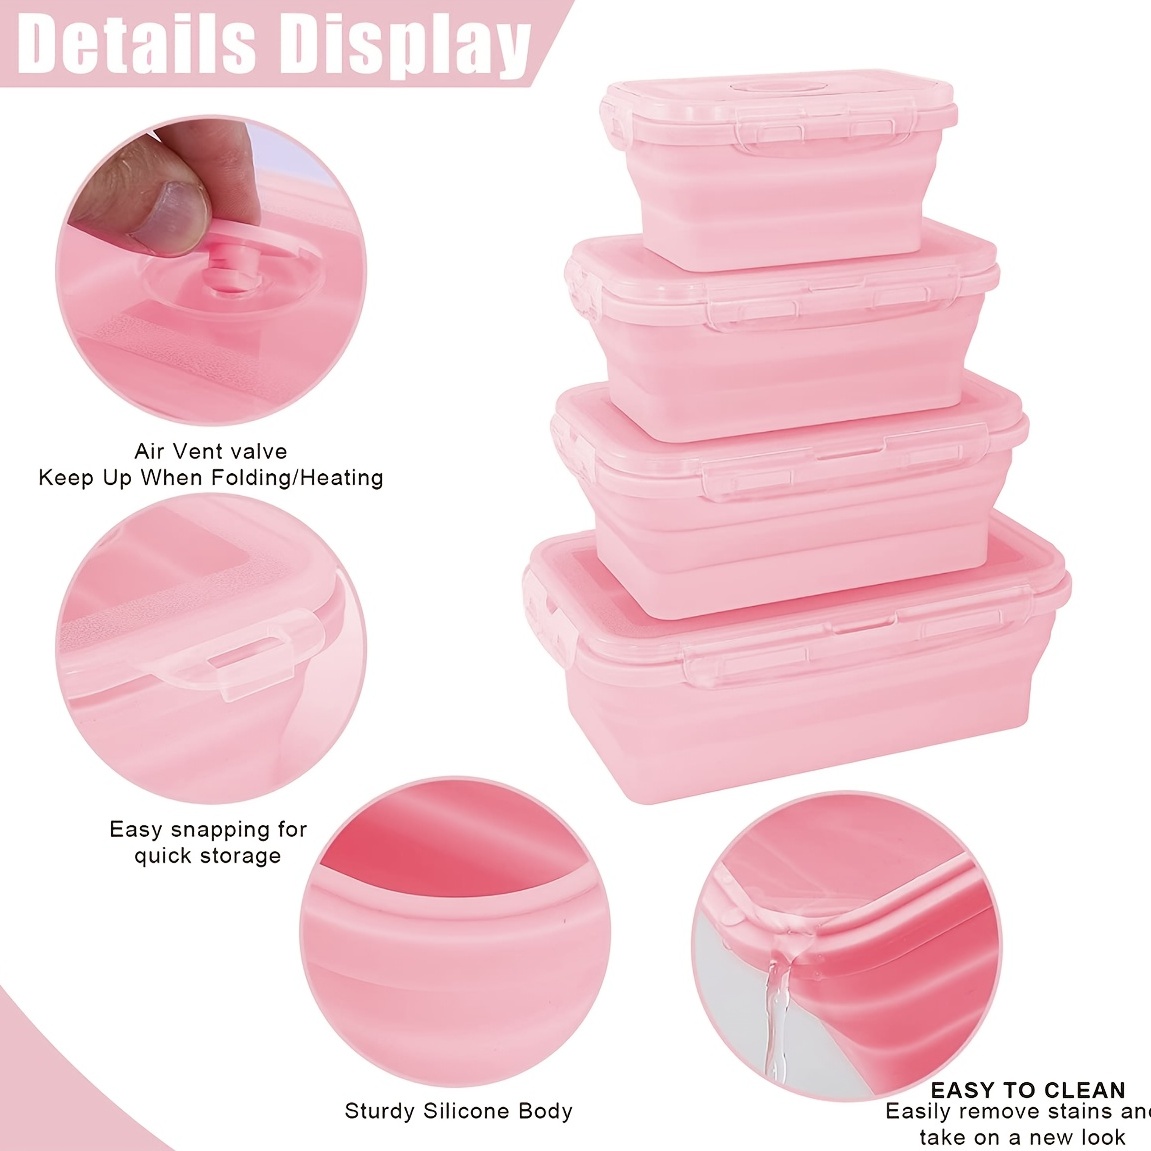 1pc Folding Silicone Insulated Lunch Box Collapsible Portable Round Bento  Box For Office Workers Leakproof Food Storage Container With Bpa Free  Airtight Plastic Lid Microwave And Freezer Safe Home Kitchen Supplies